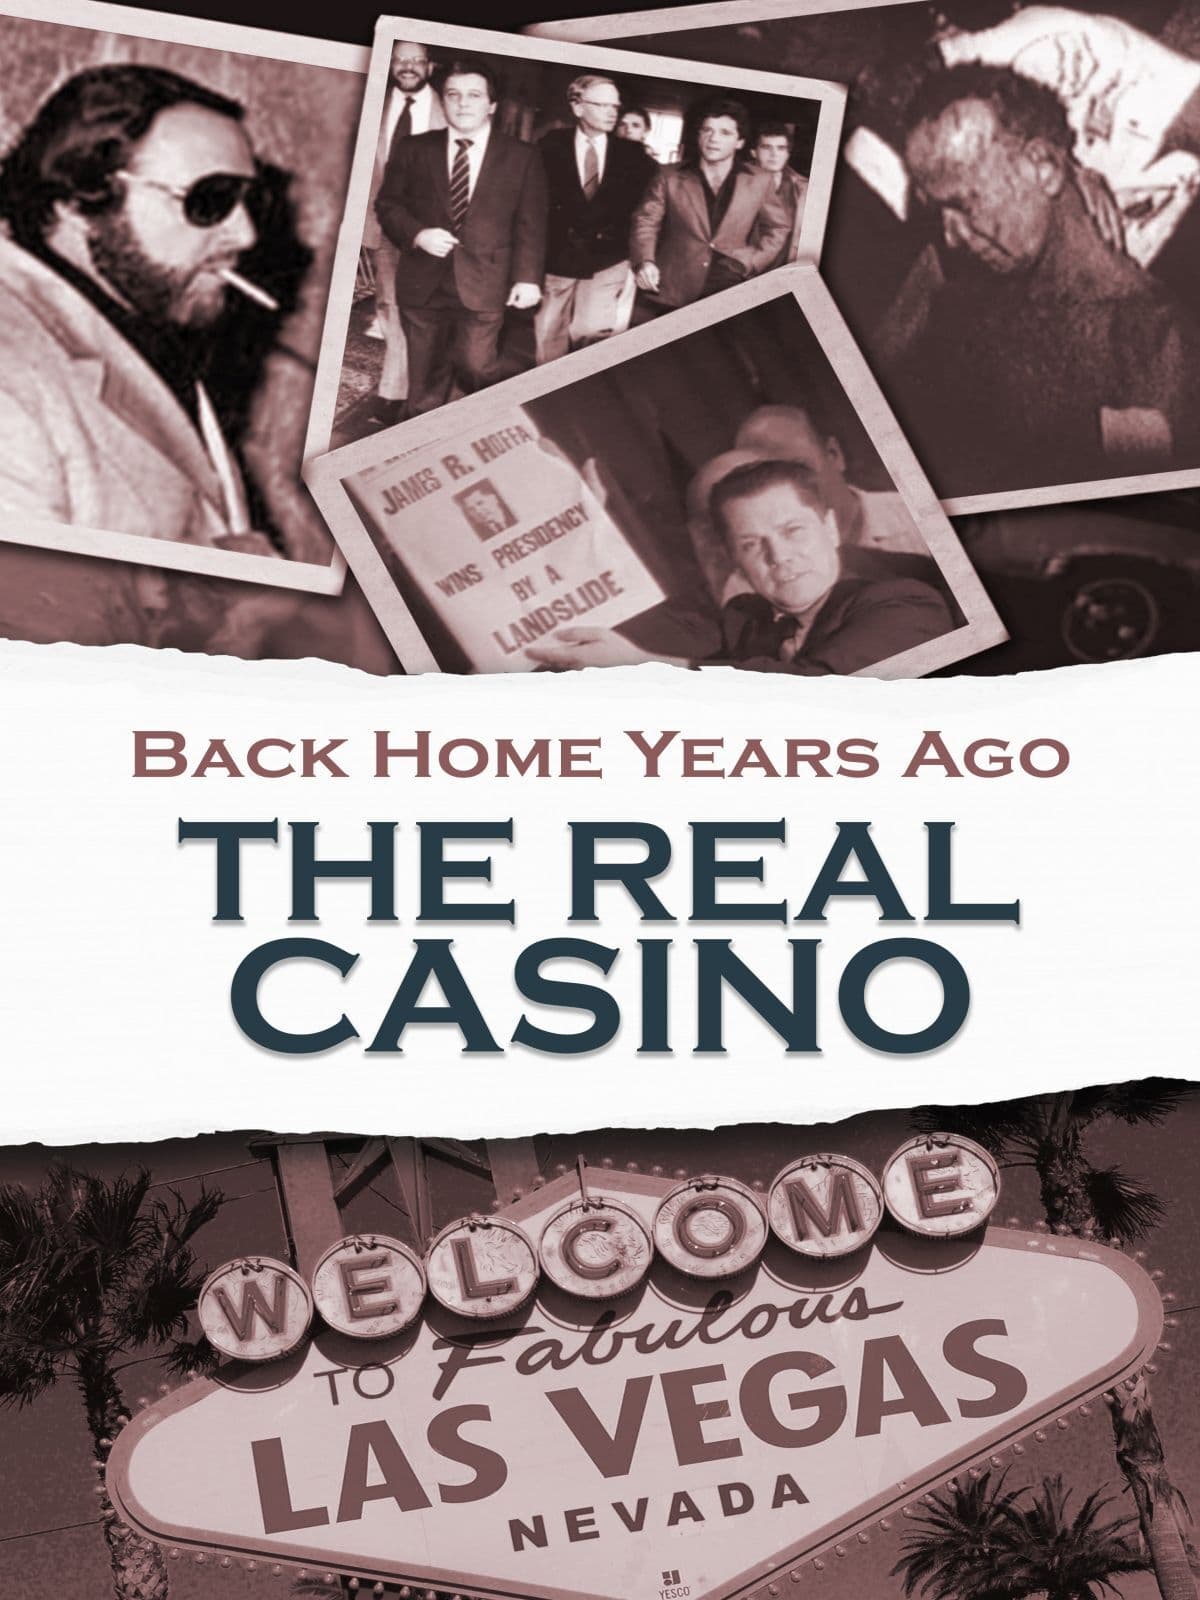 Back Home Years Ago: The Real Casino